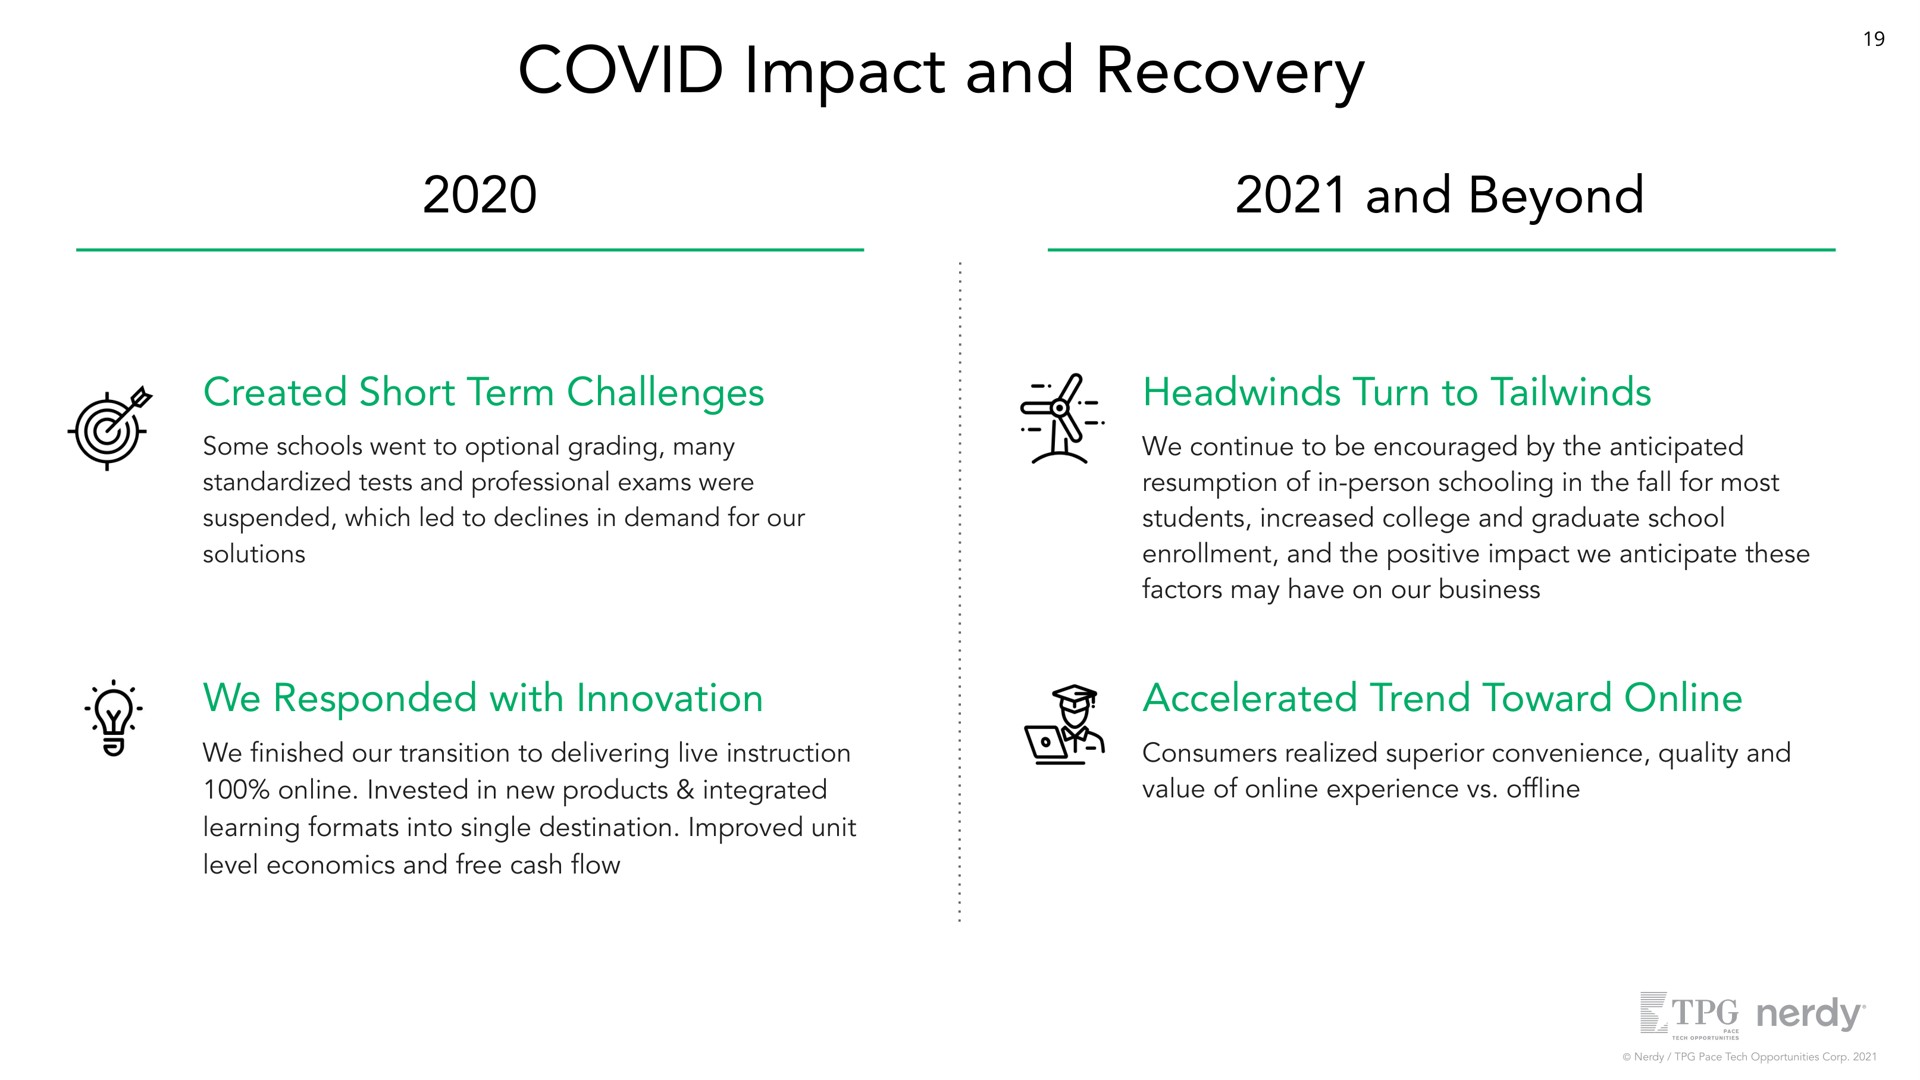 covid impact and recovery and beyond created short term challenges turn to we continue to be encouraged by the anticipated resumption of in person schooling in the fall for most students increased college and graduate school enrollment and the positive impact we anticipate these factors may have on our business we responded with innovation accelerated trend toward we our transition to delivering live instruction invested in new products integrated learning formats into single destination improved unit level economics and free cash consumers realized superior convenience quality and value of experience of | Nerdy